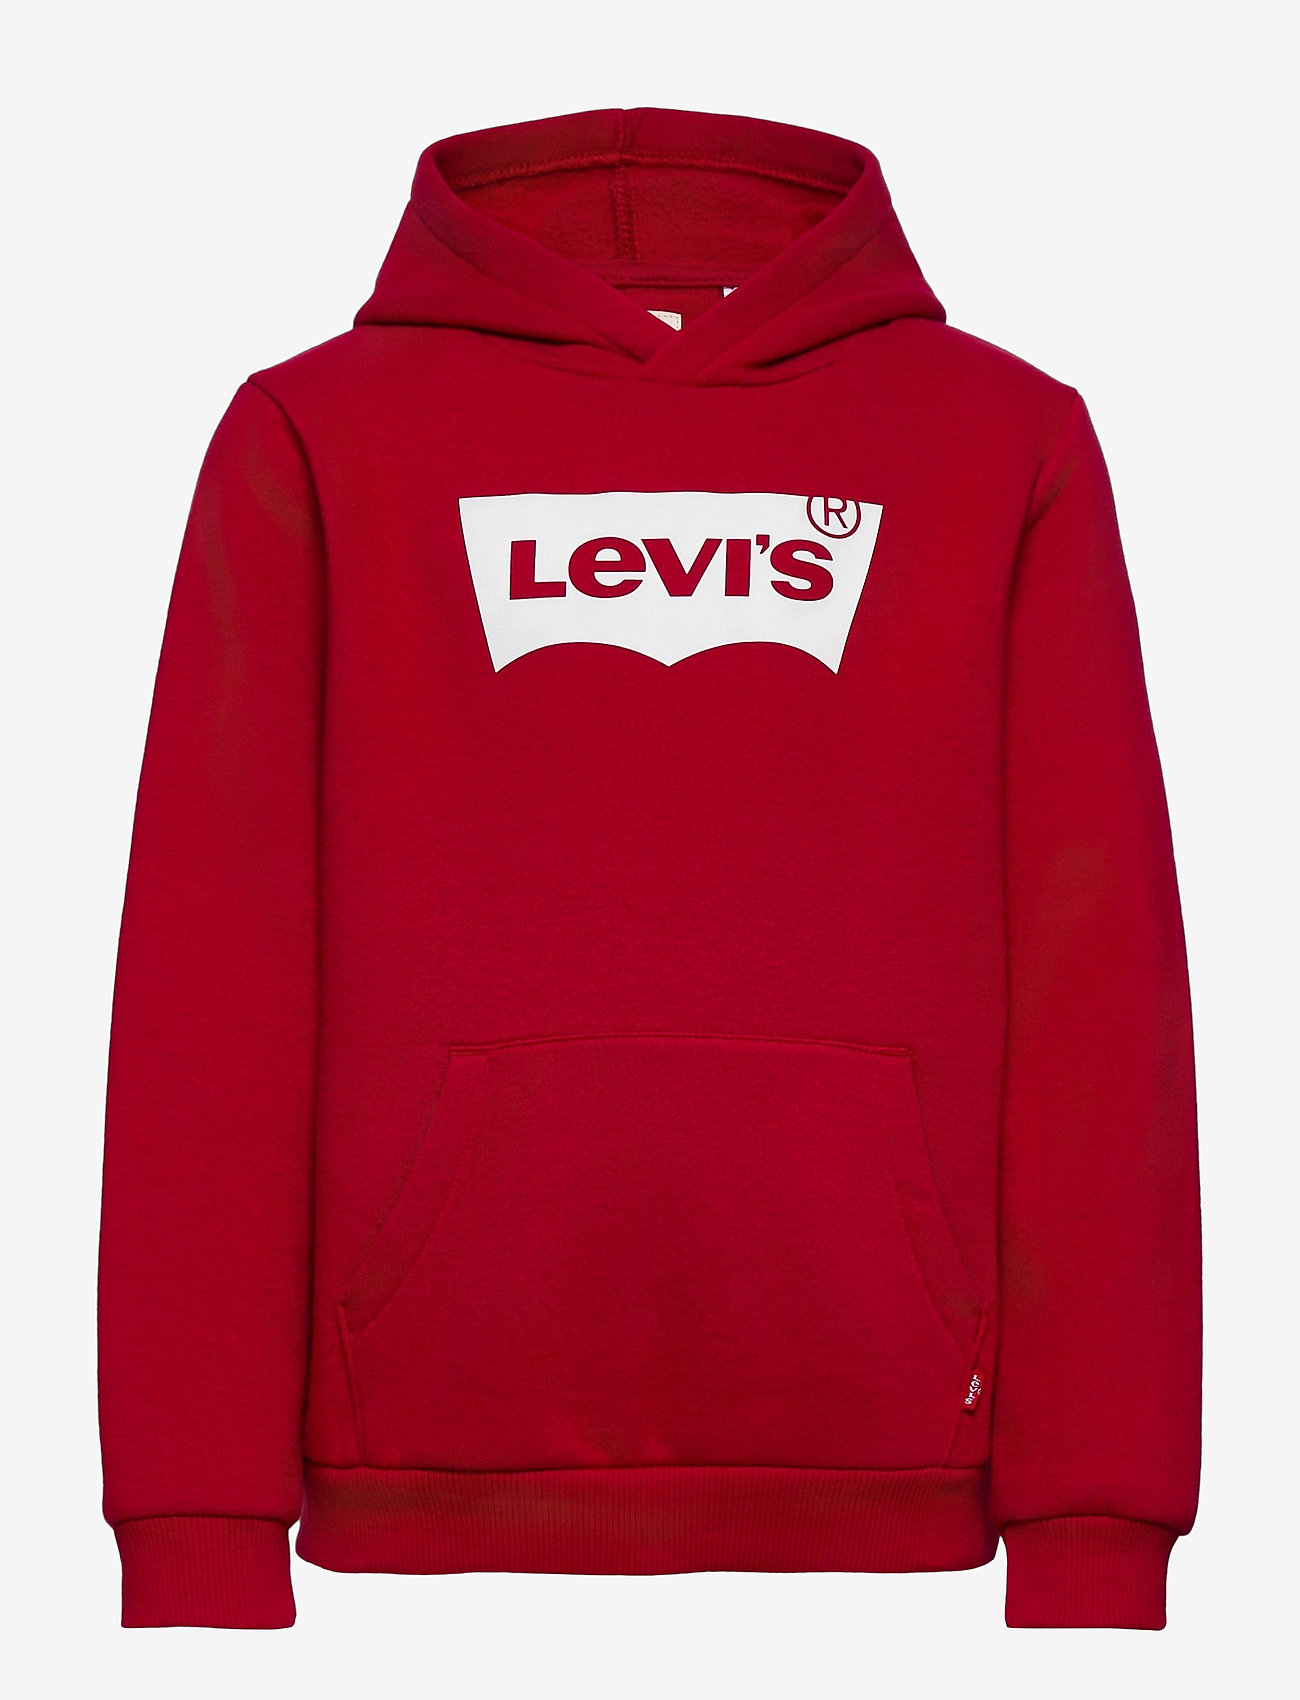 Levi's - Levi's® Batwing Screenprint Hooded Pullover - huvtröjor - levis red/ white - 0